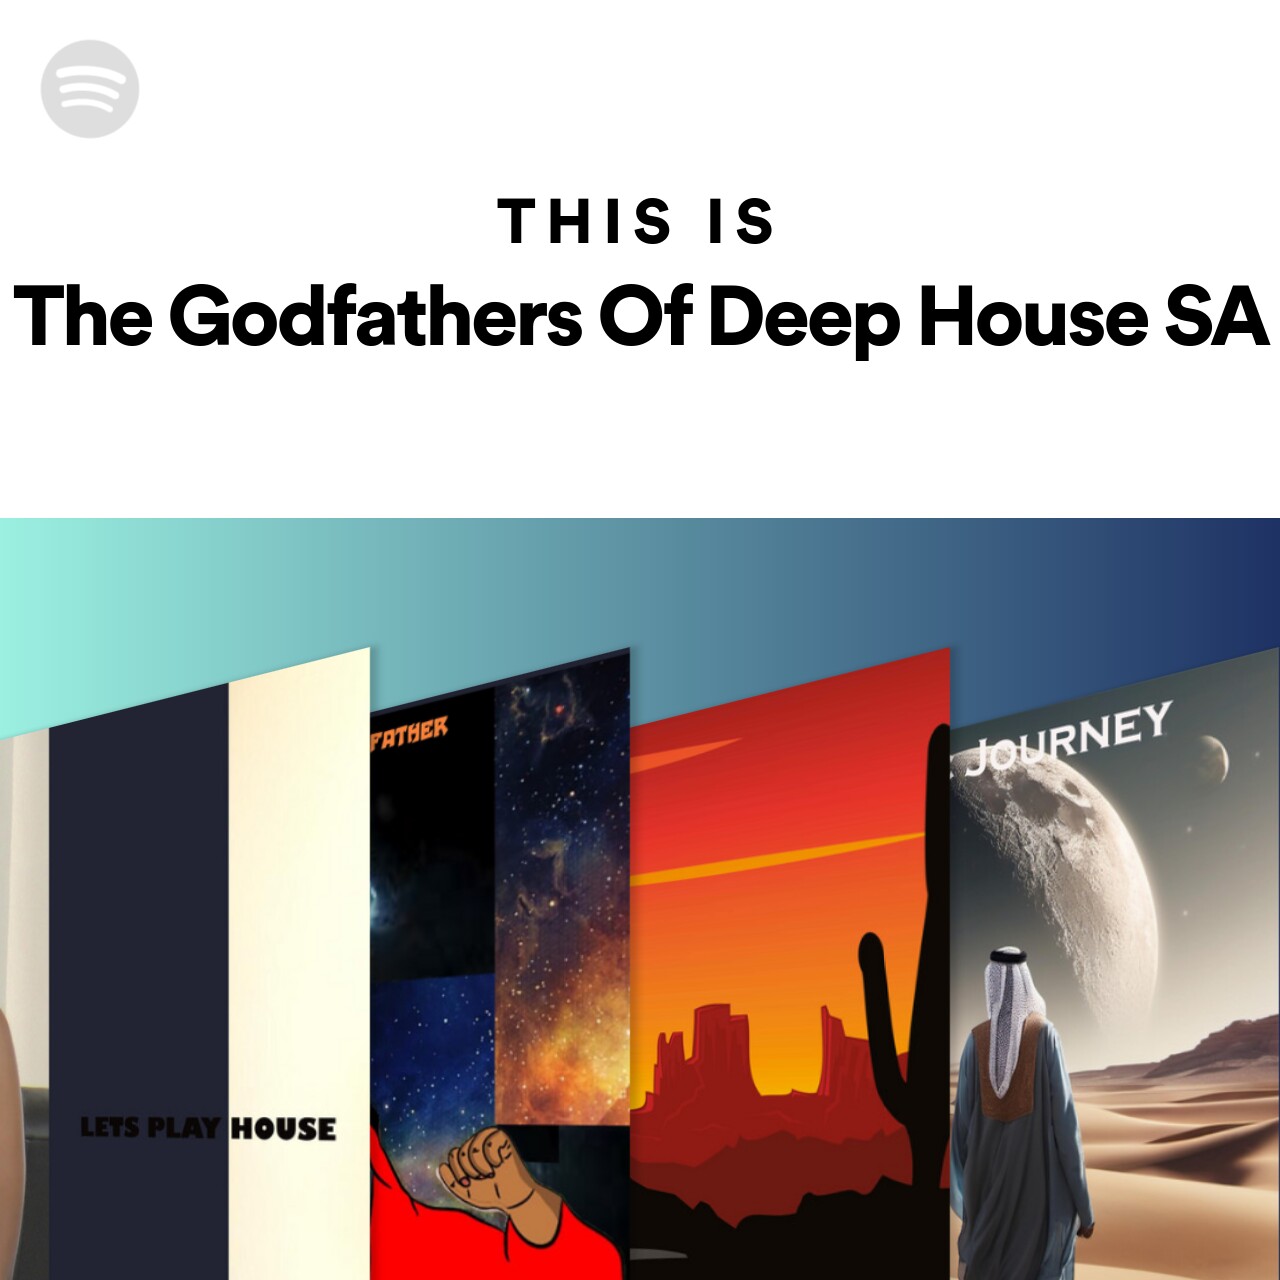 This Is The Godfathers Of Deep House SA